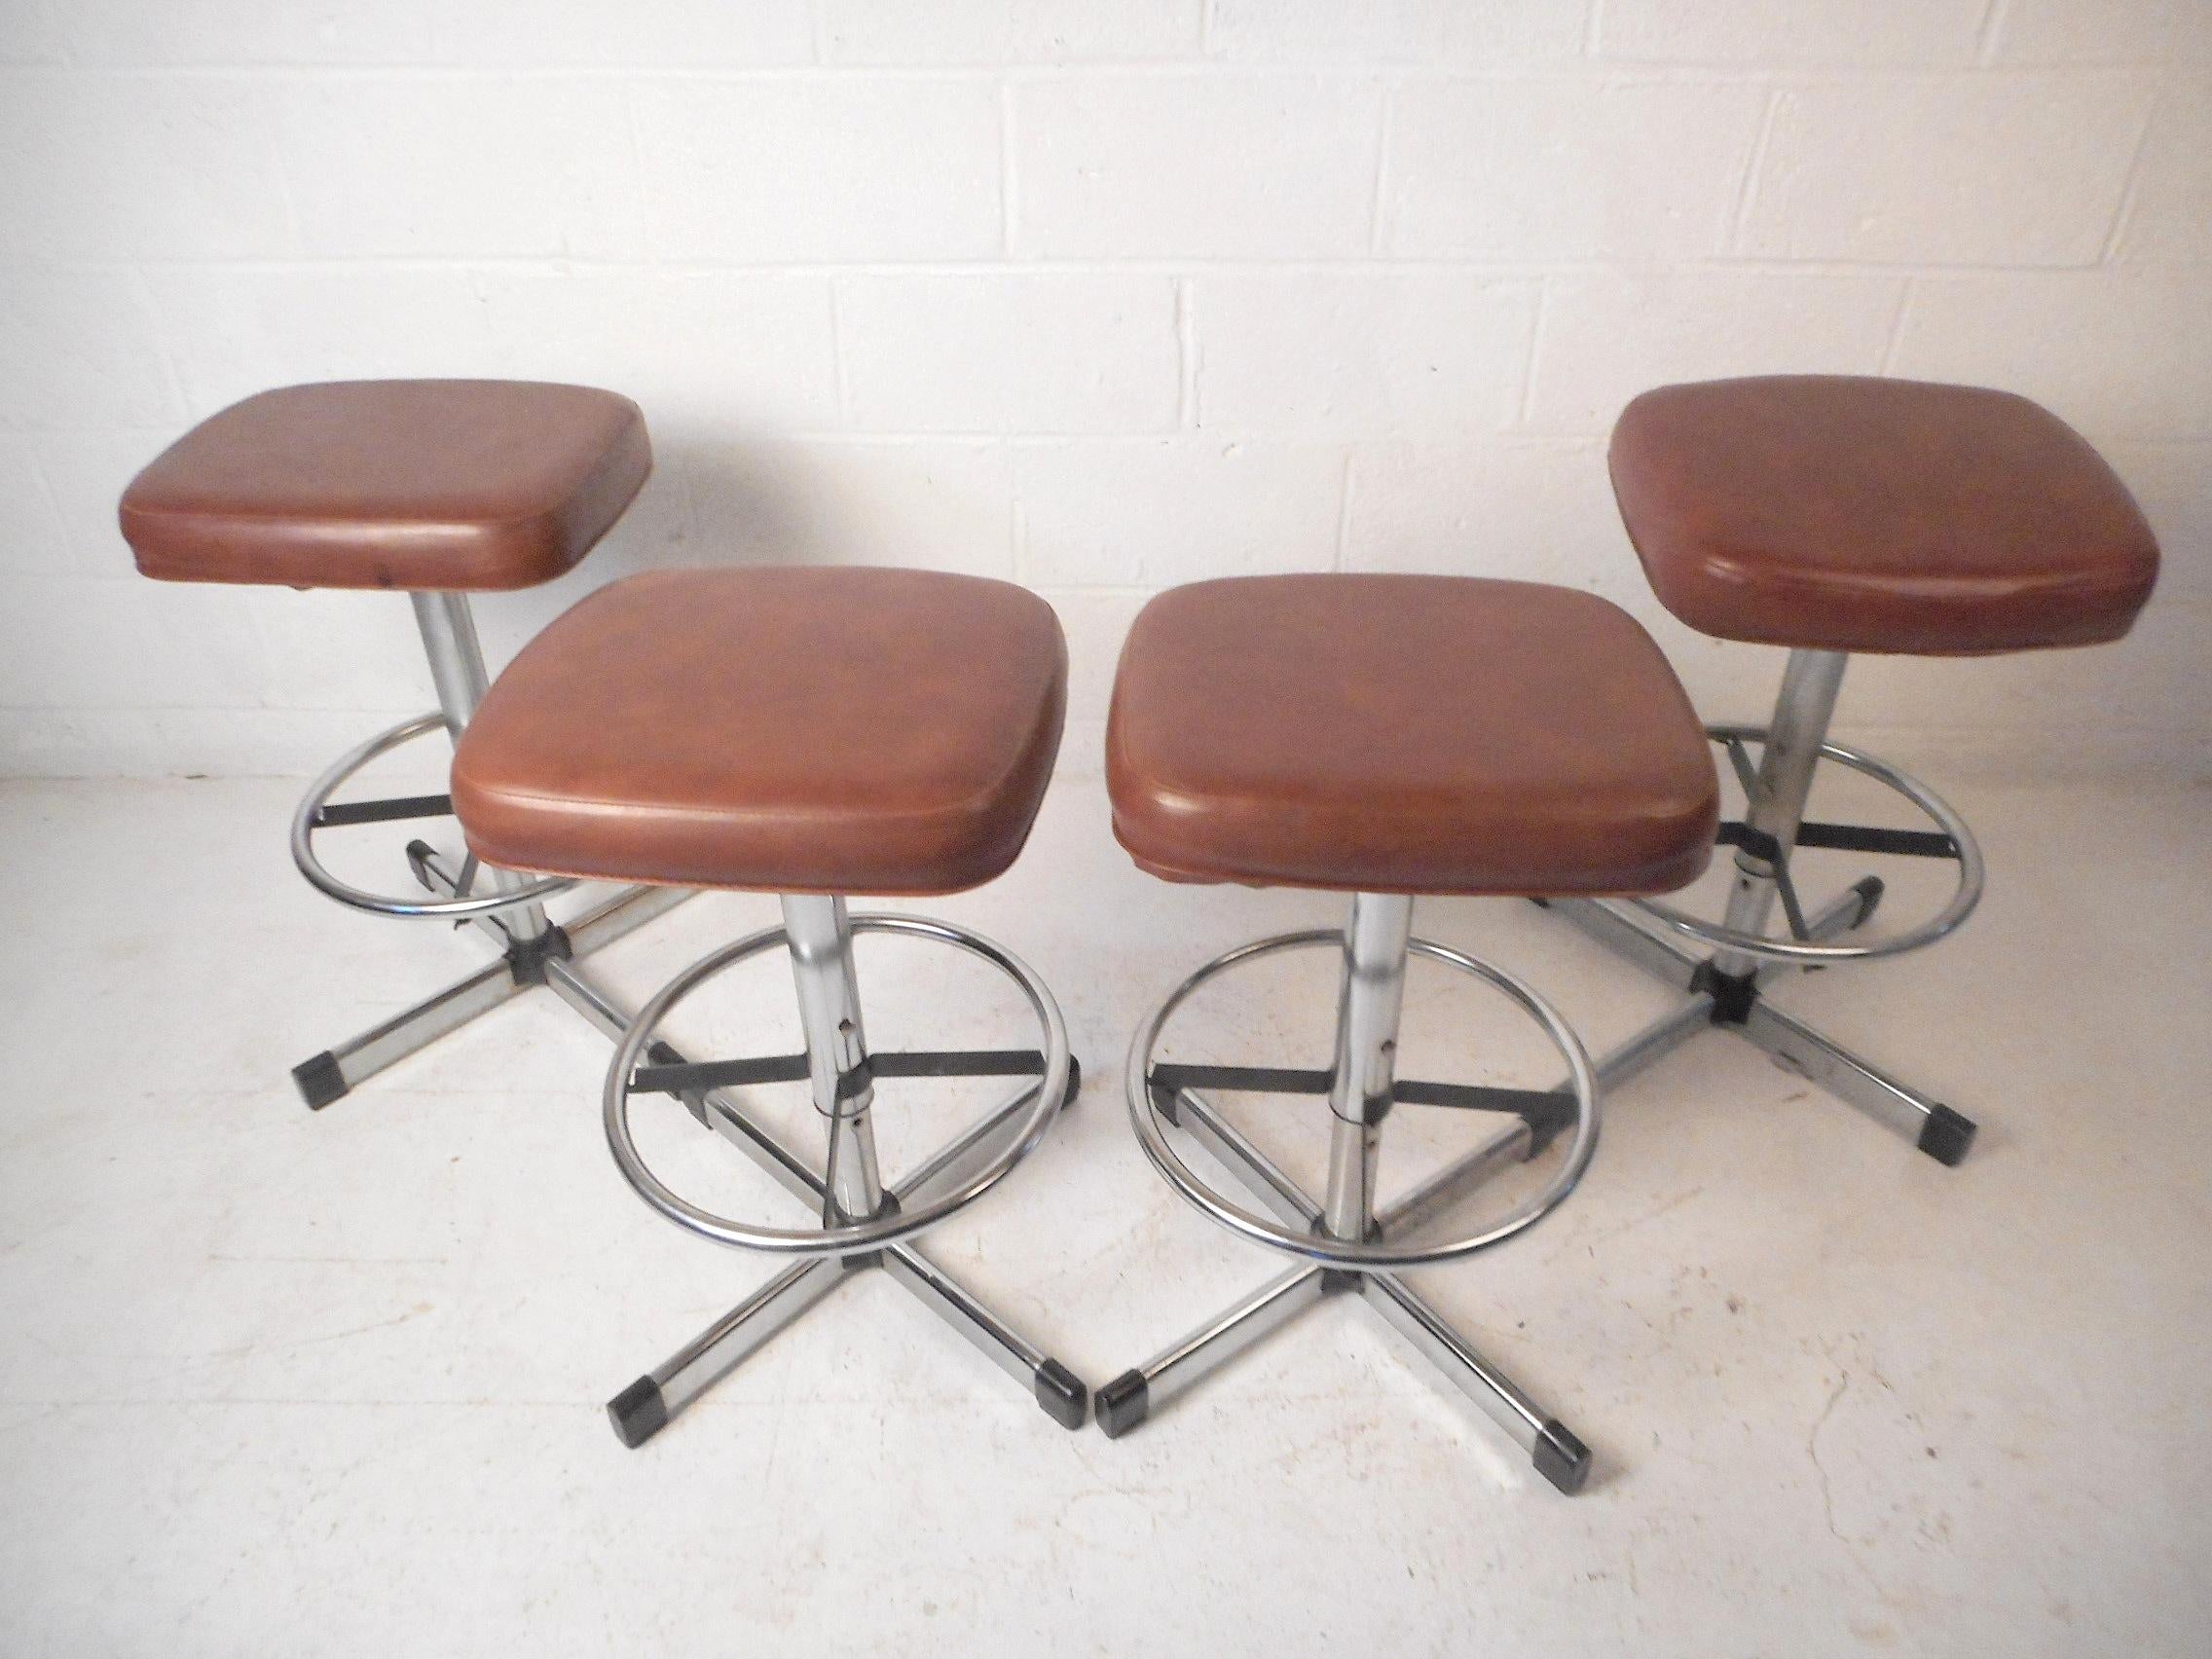 This impressive set of midcentury stools by Samsonite feature comfortable faux-leather upholstered swiveling seats, sleek chrome-plated bases, and sturdy circular footrests. A great addition to any home, business, or office's modern interior, circa